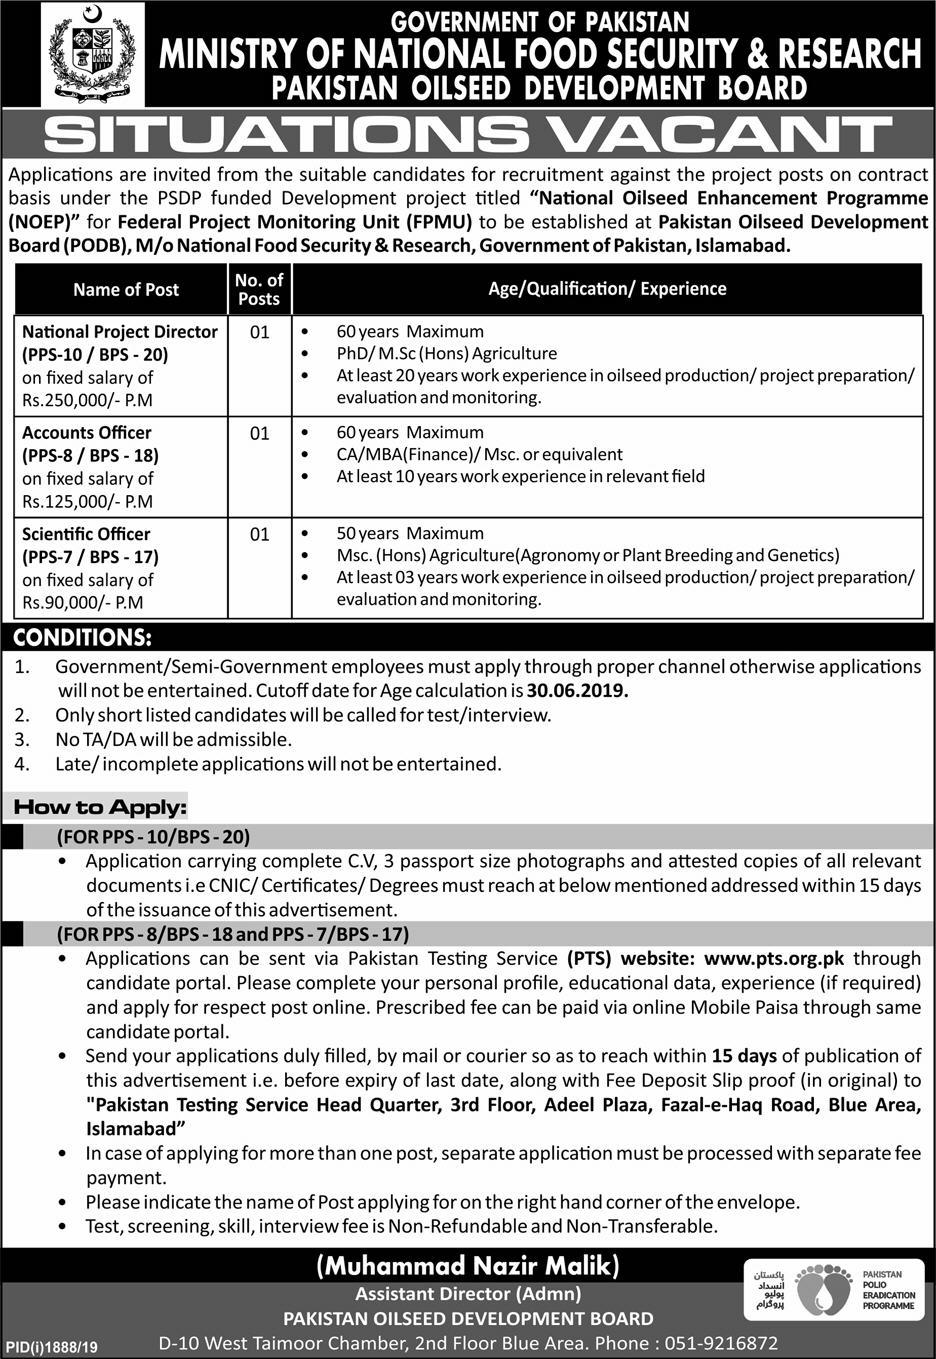 Ministry of National Food Security and Research Offering Jobs 2019